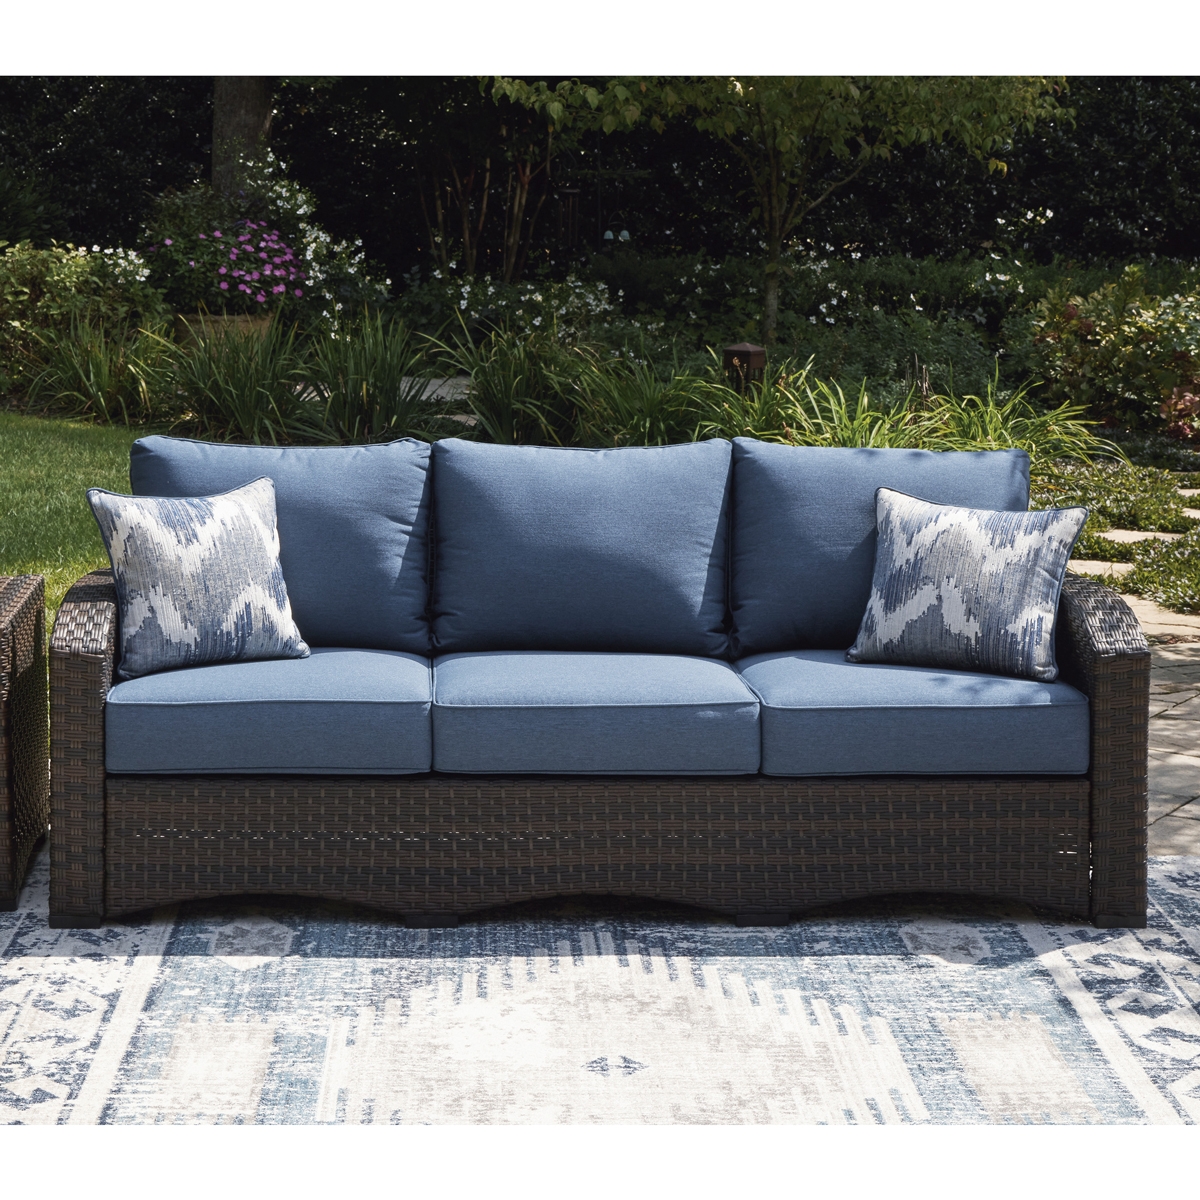 Picture of PORT ROYAL SOFA